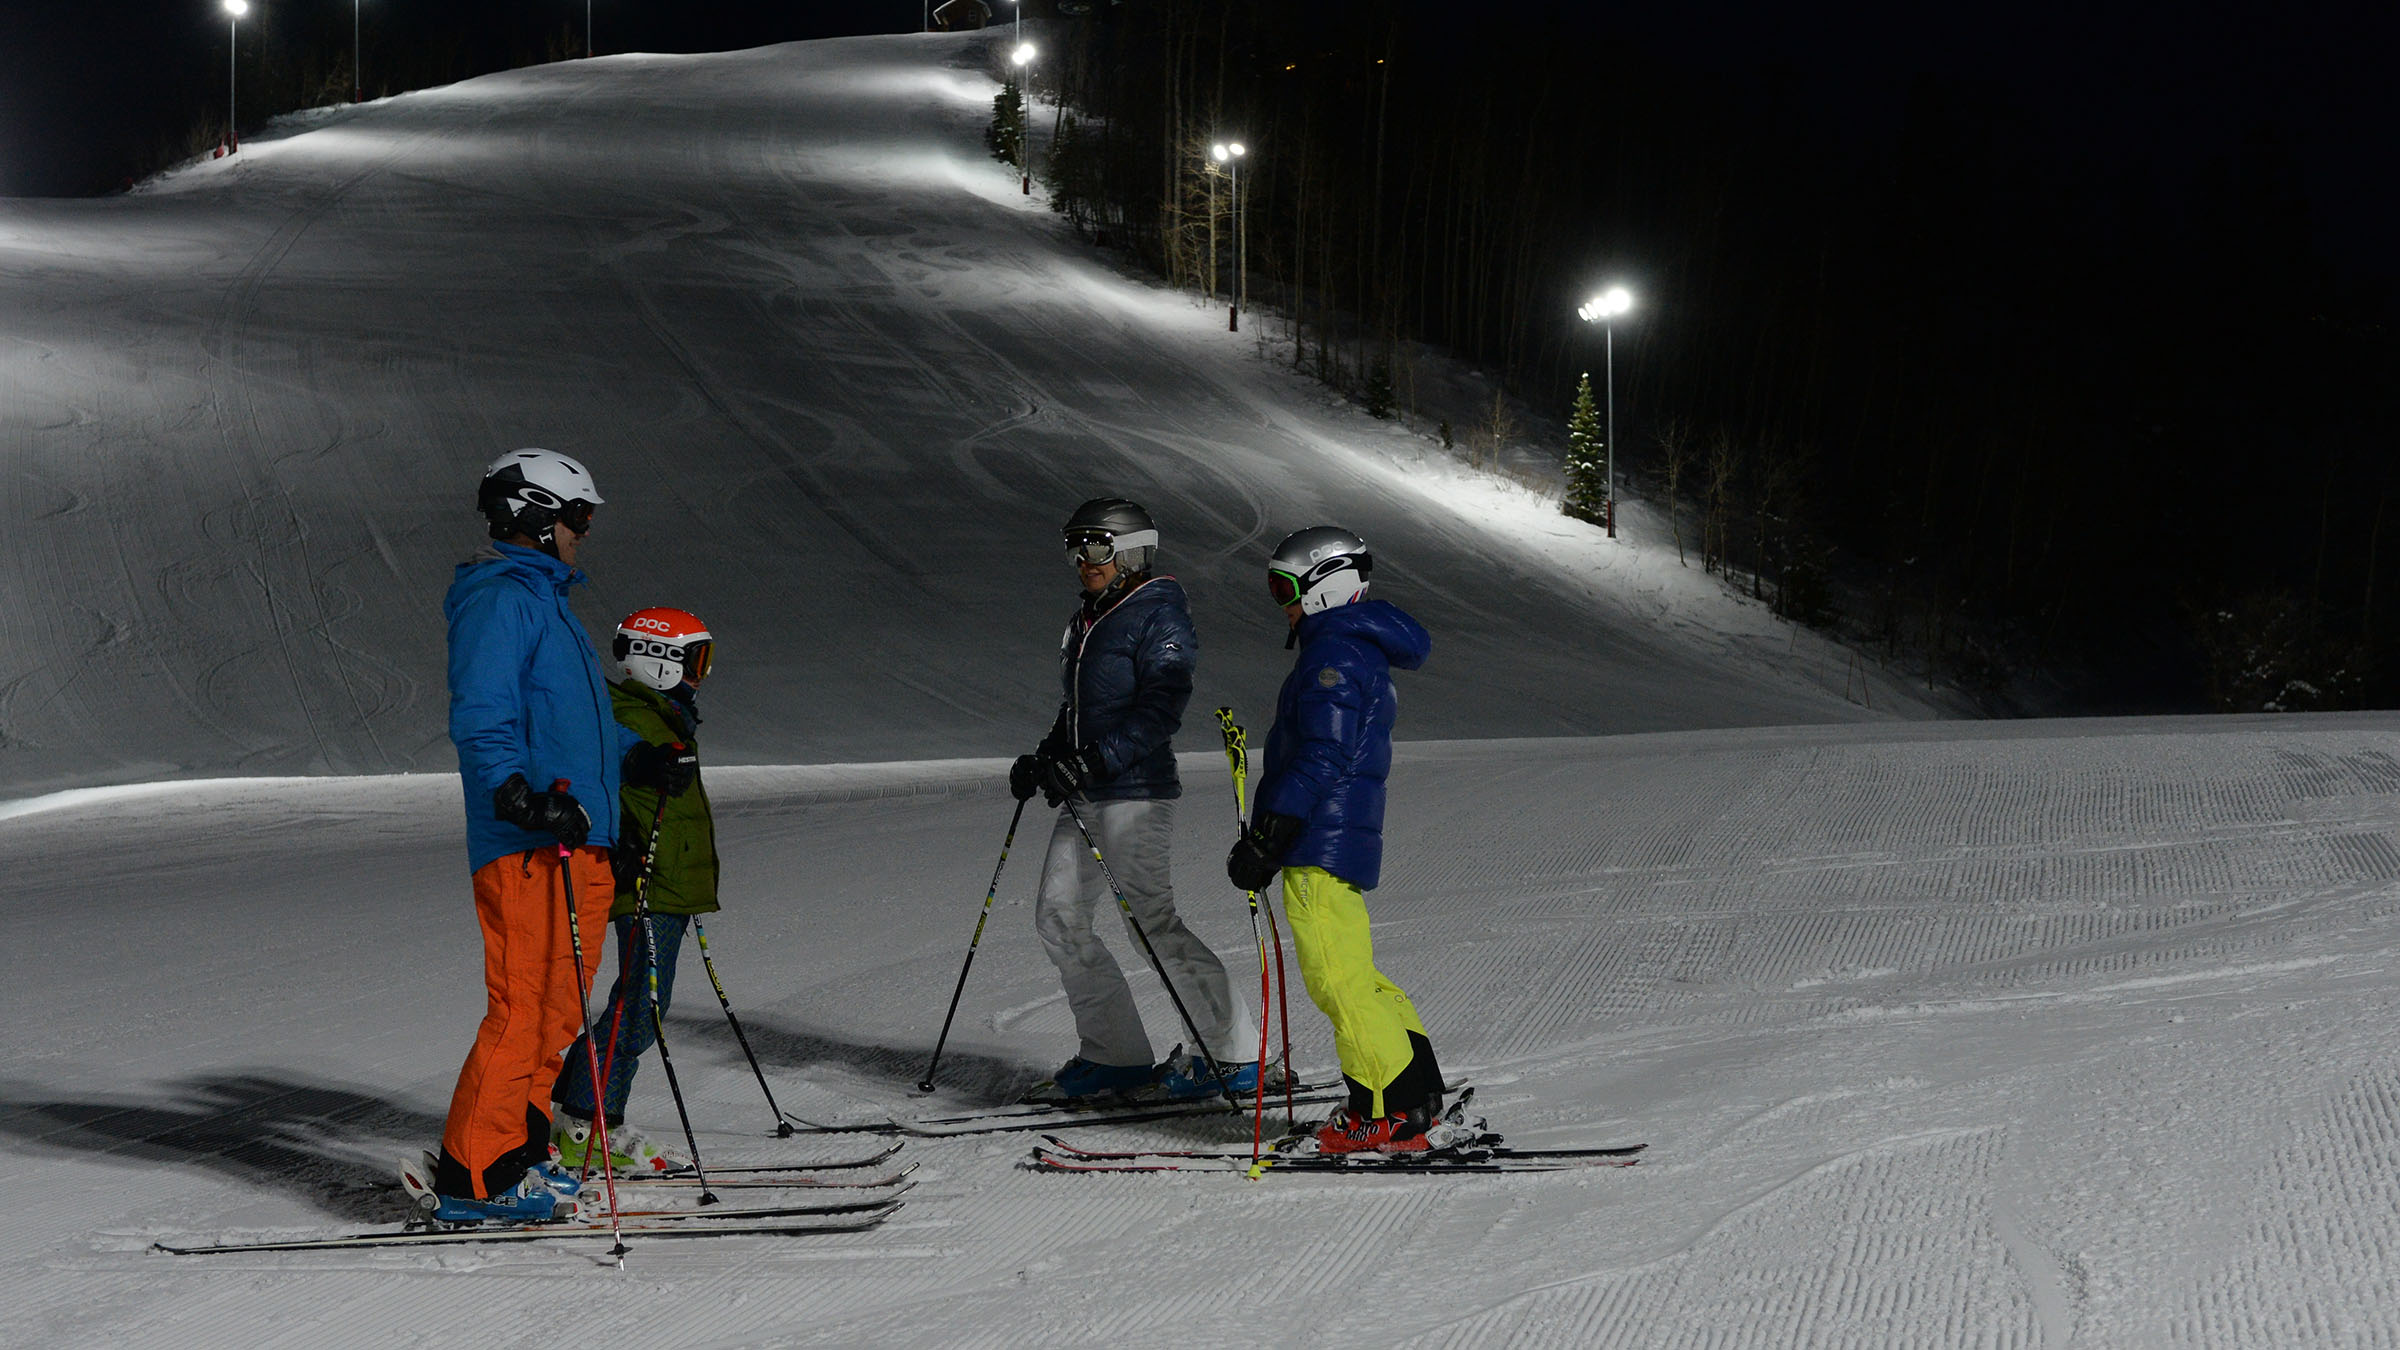 Night Skiing With Skiers